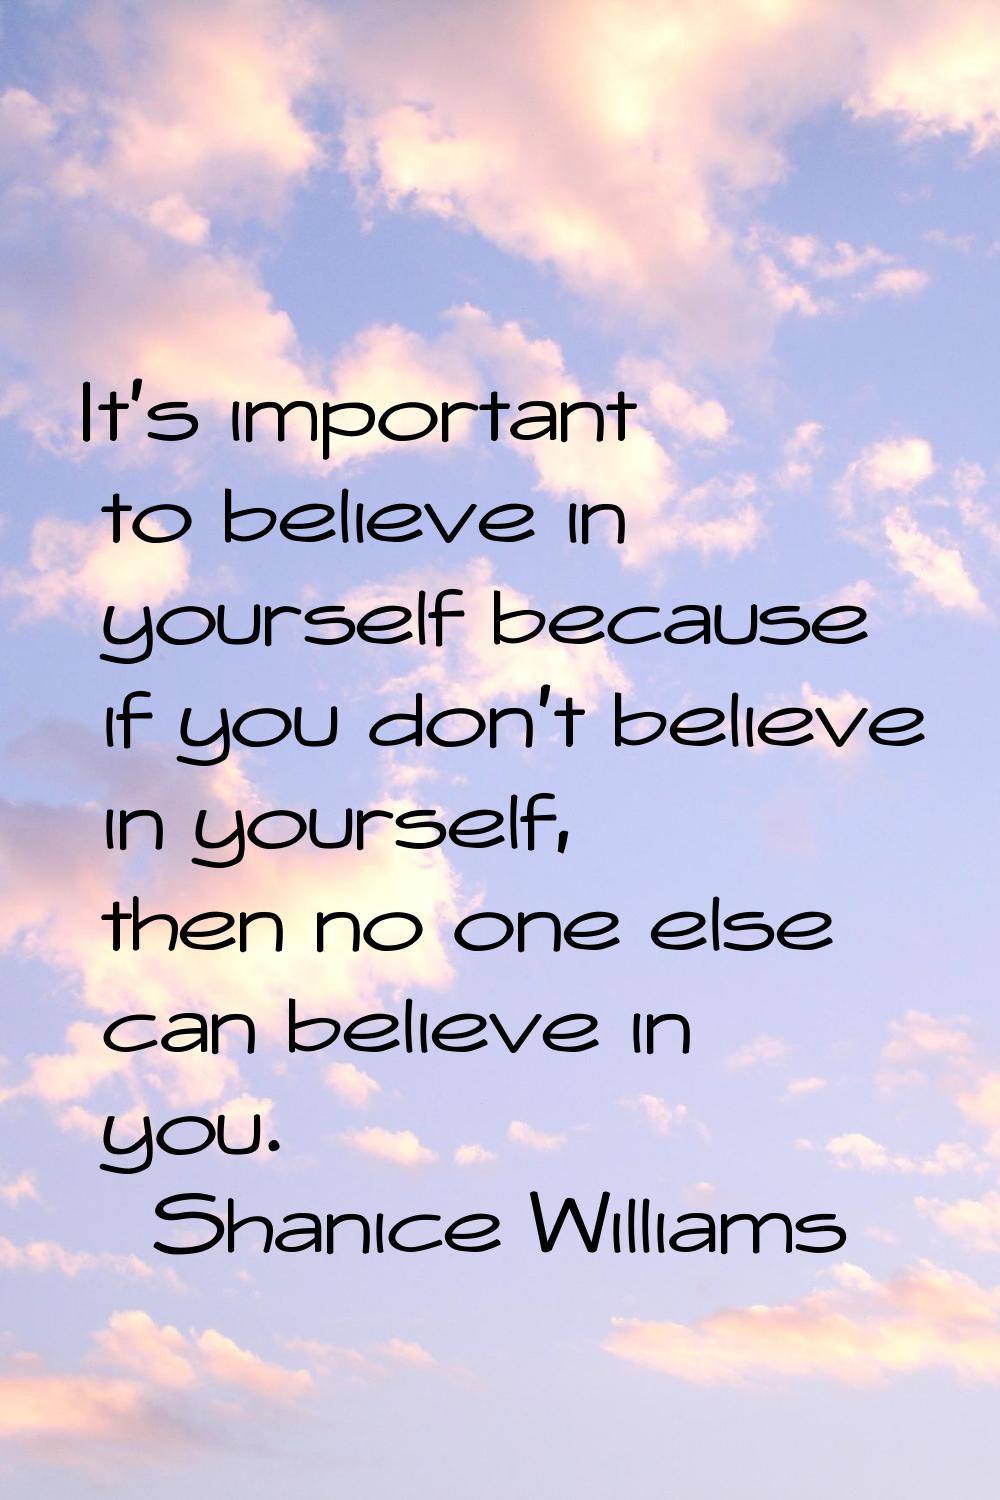 It's important to believe in yourself because if you don't believe in yourself, then no one else ca